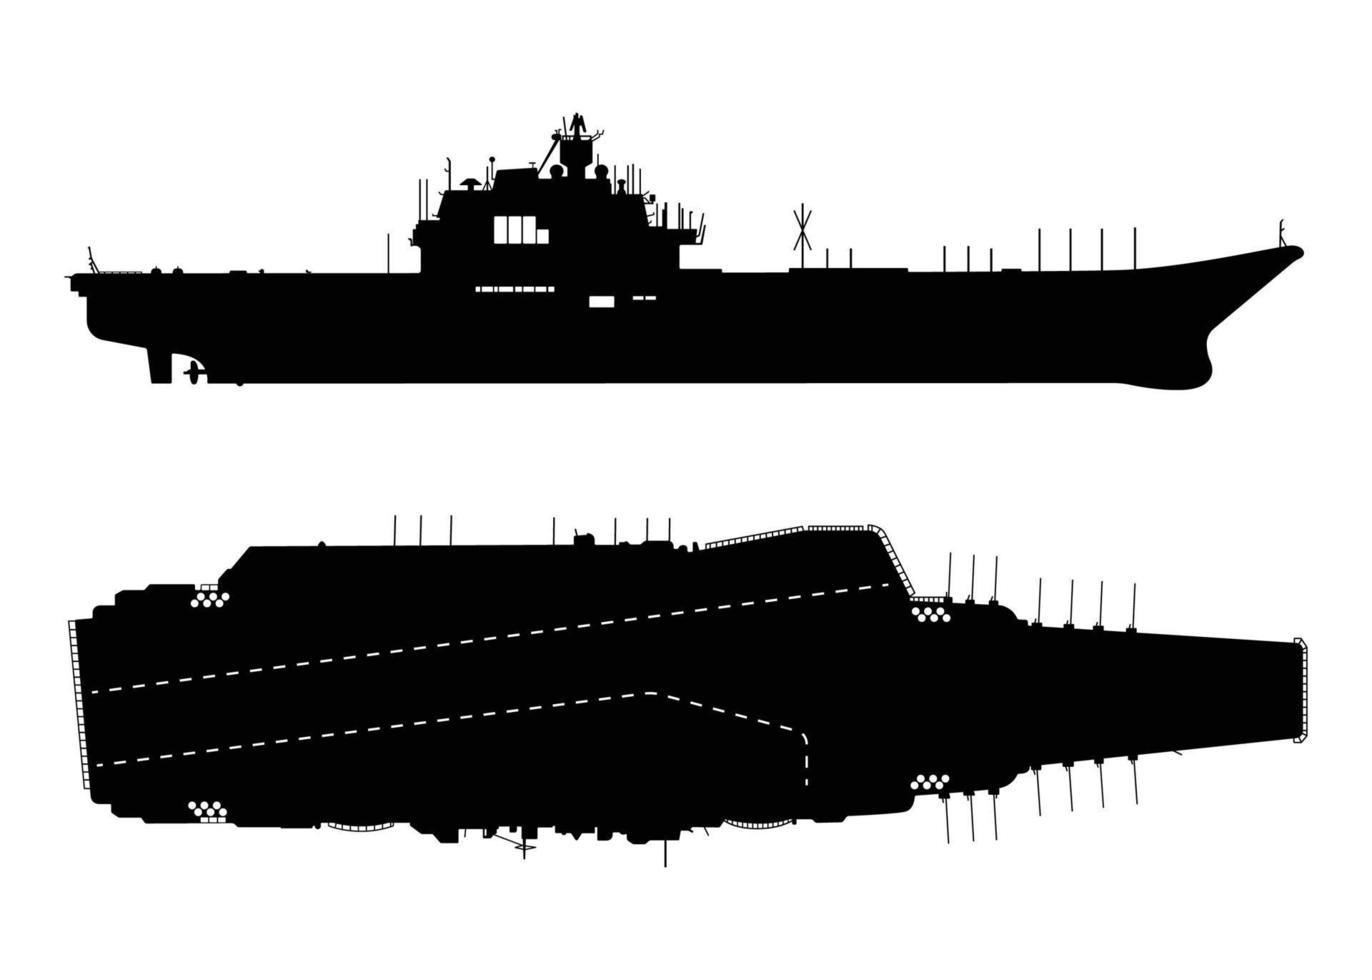 Aircraft carrier Warship Vessel Silhouette, Army Seagoing Airbase Military Capital ship vector